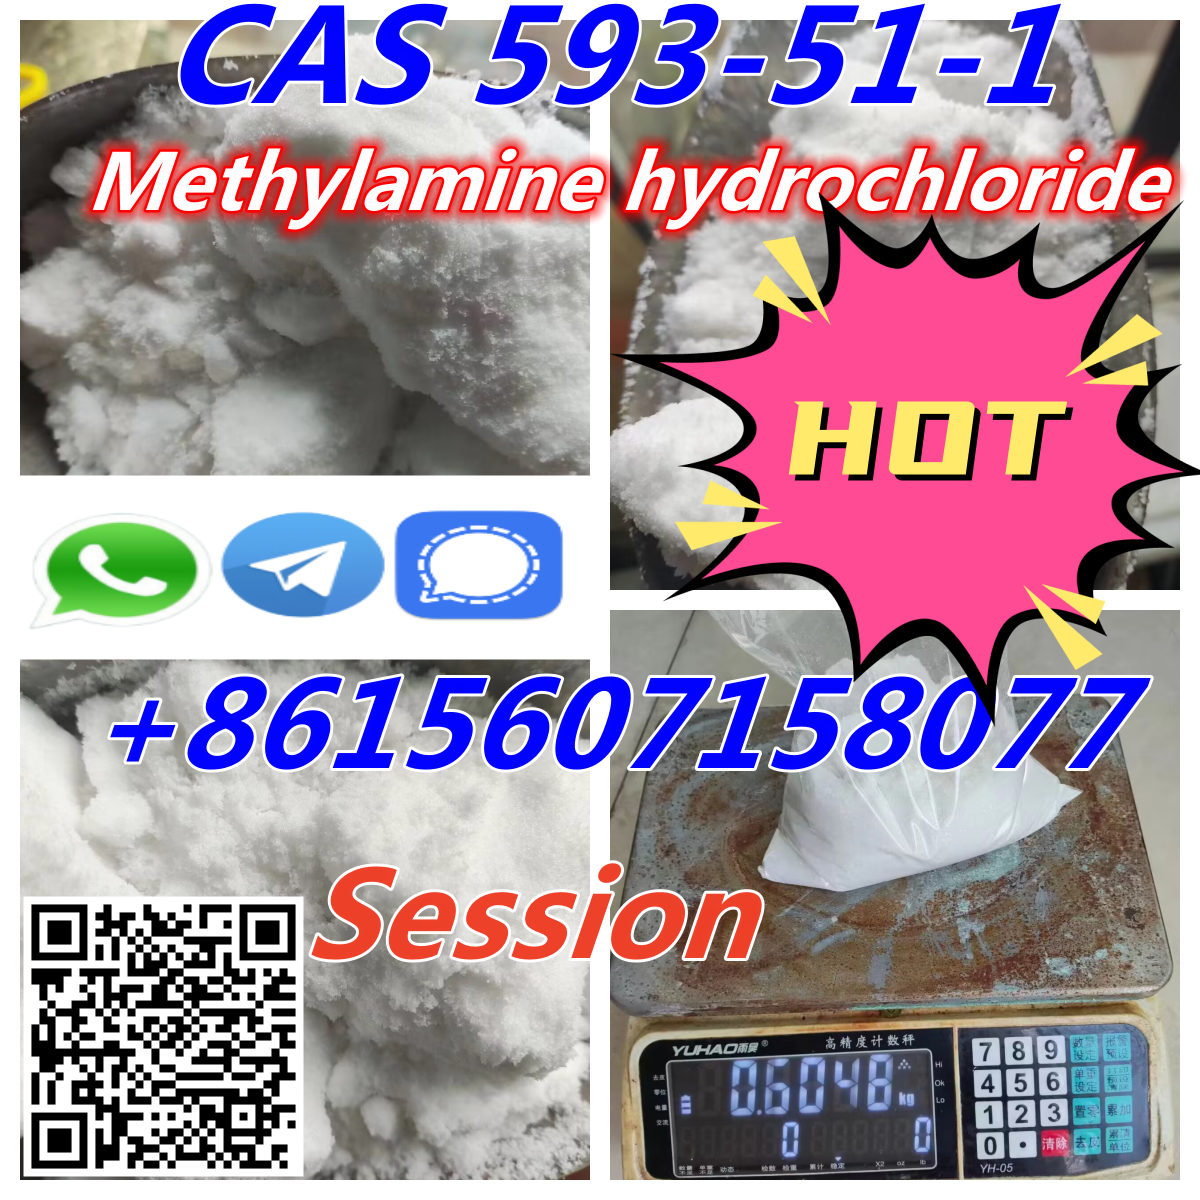 Hot Selling 99% purity CAS 593-51-1 Methylamine hydrochloride in Warehouse-image